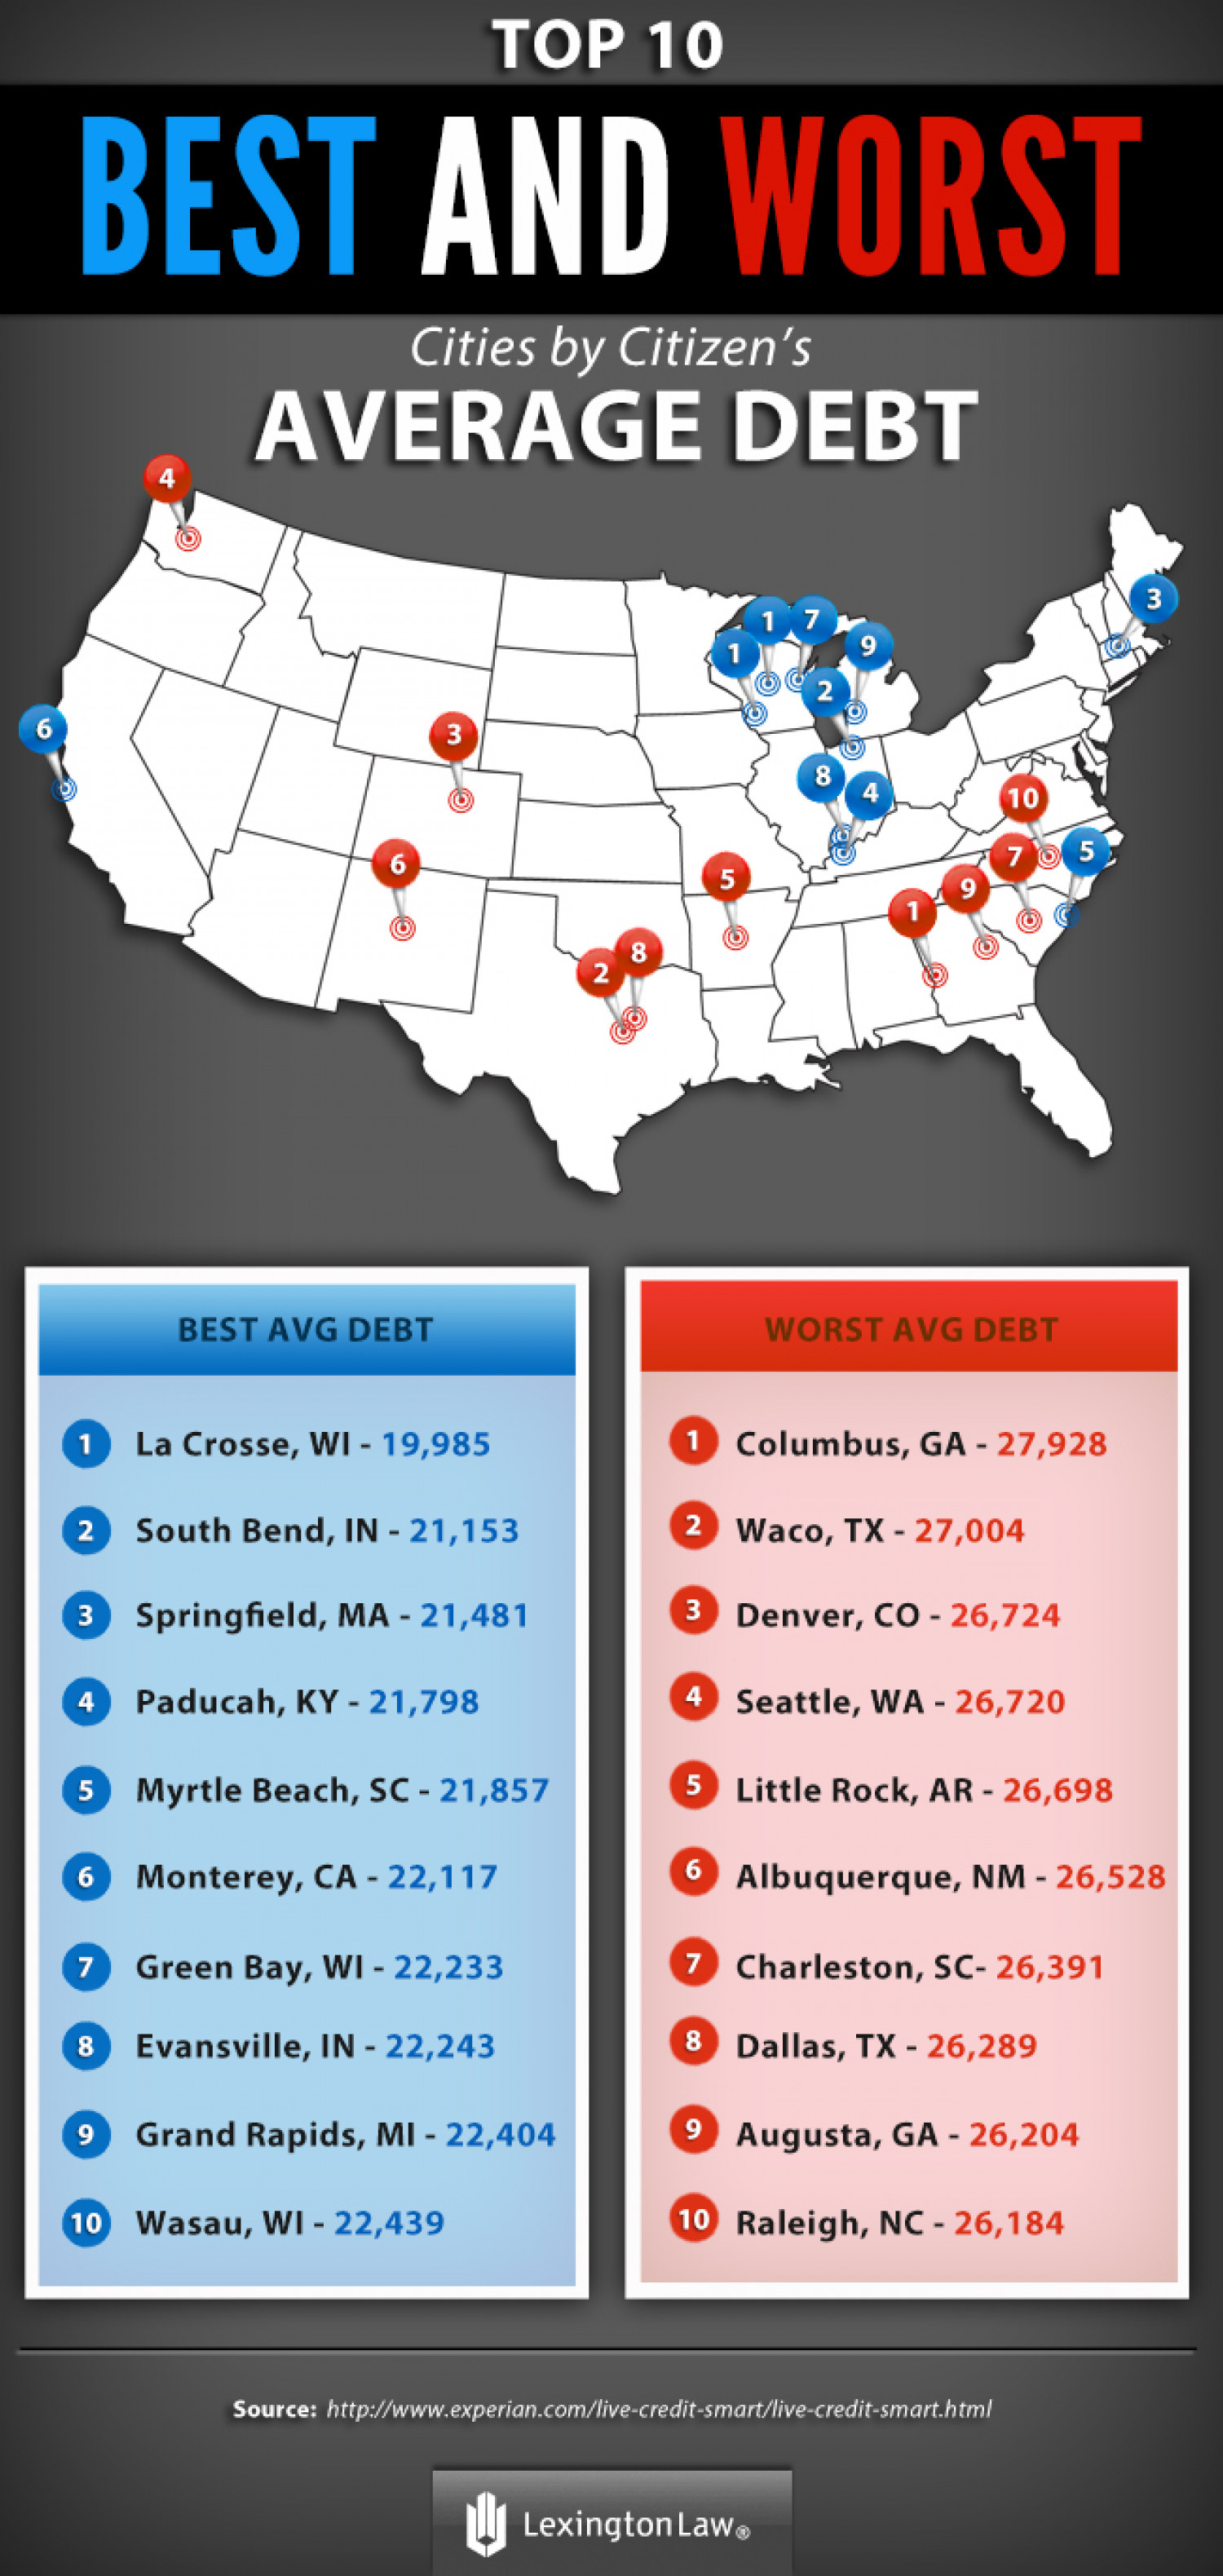 Top 10 Best and Worst Cities by Citizen’s Average Debt Infographic